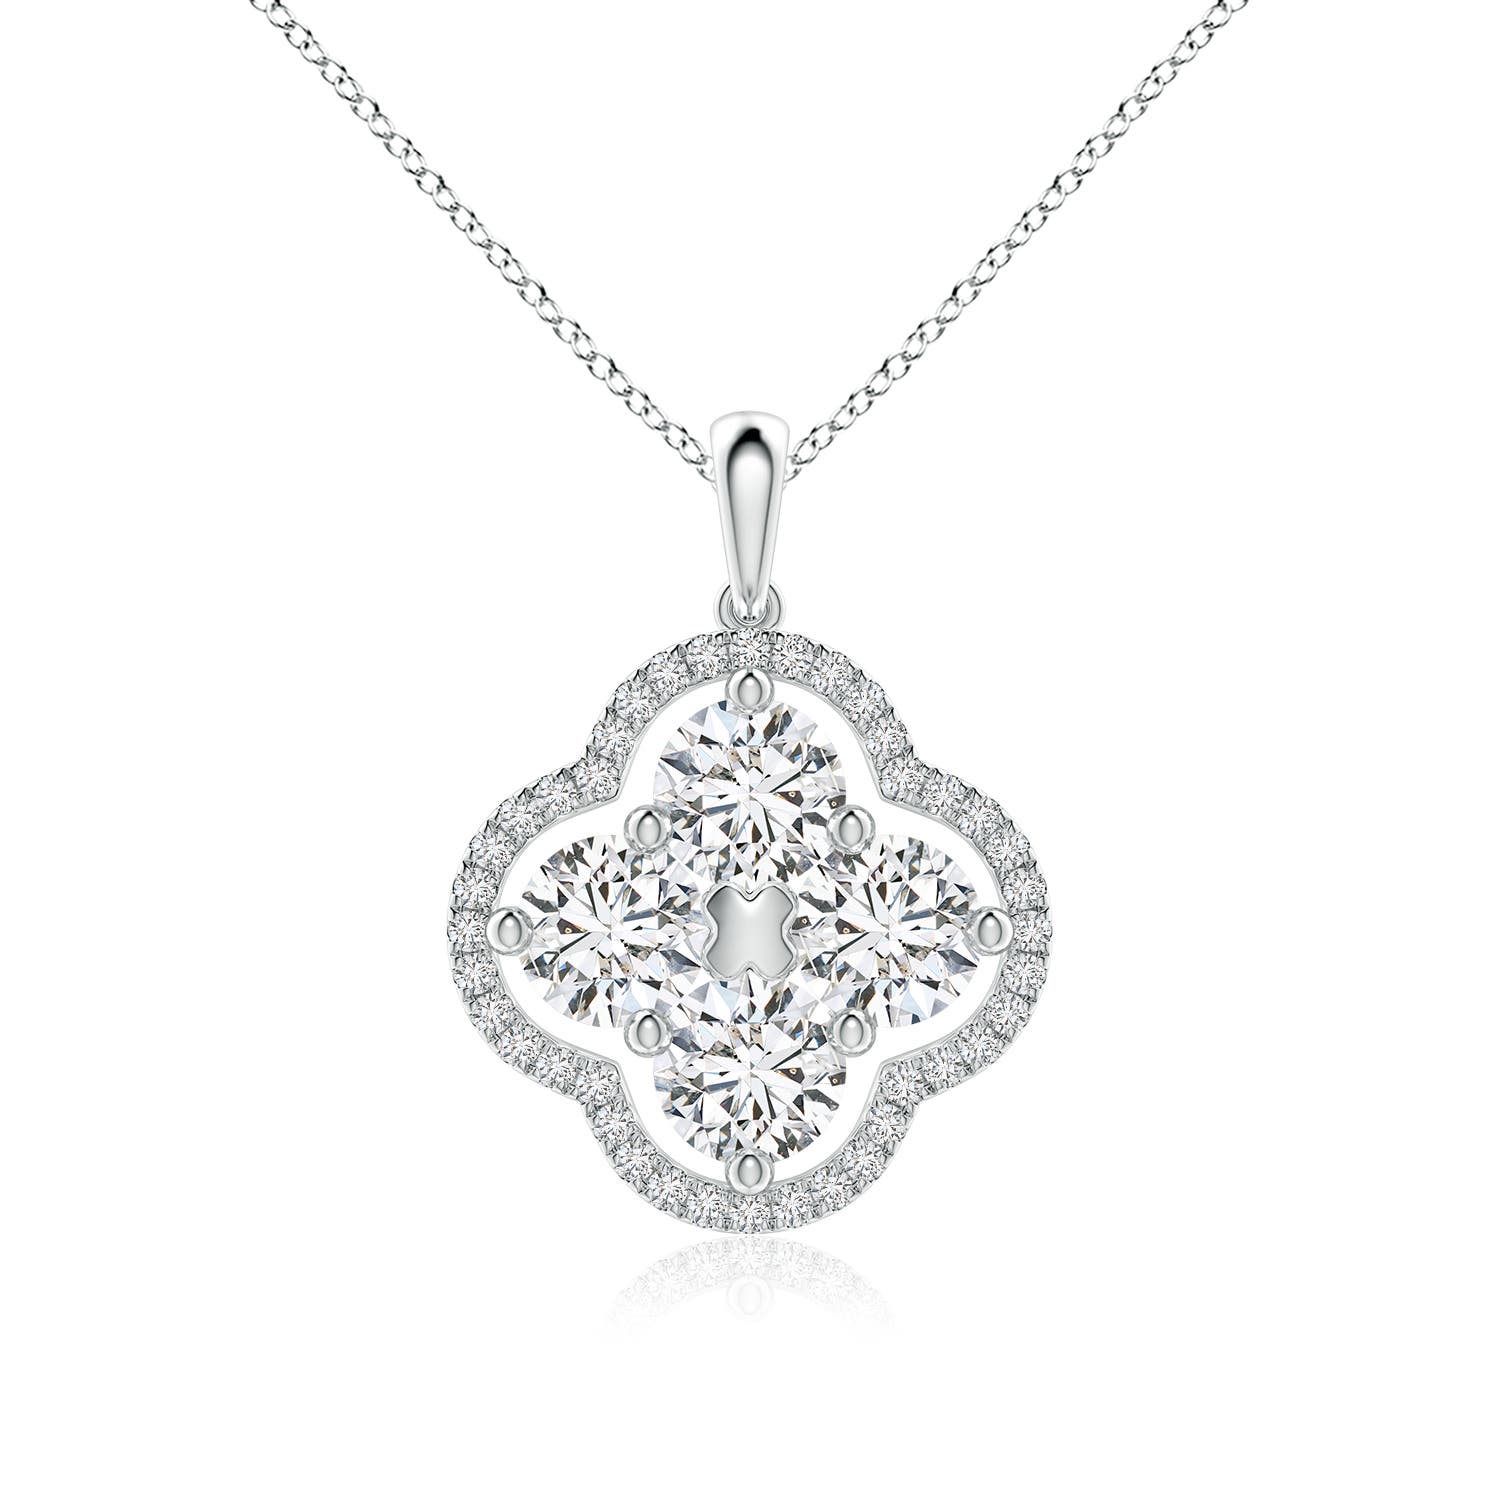 H, SI2 / 2.2 CT / 18 KT White Gold